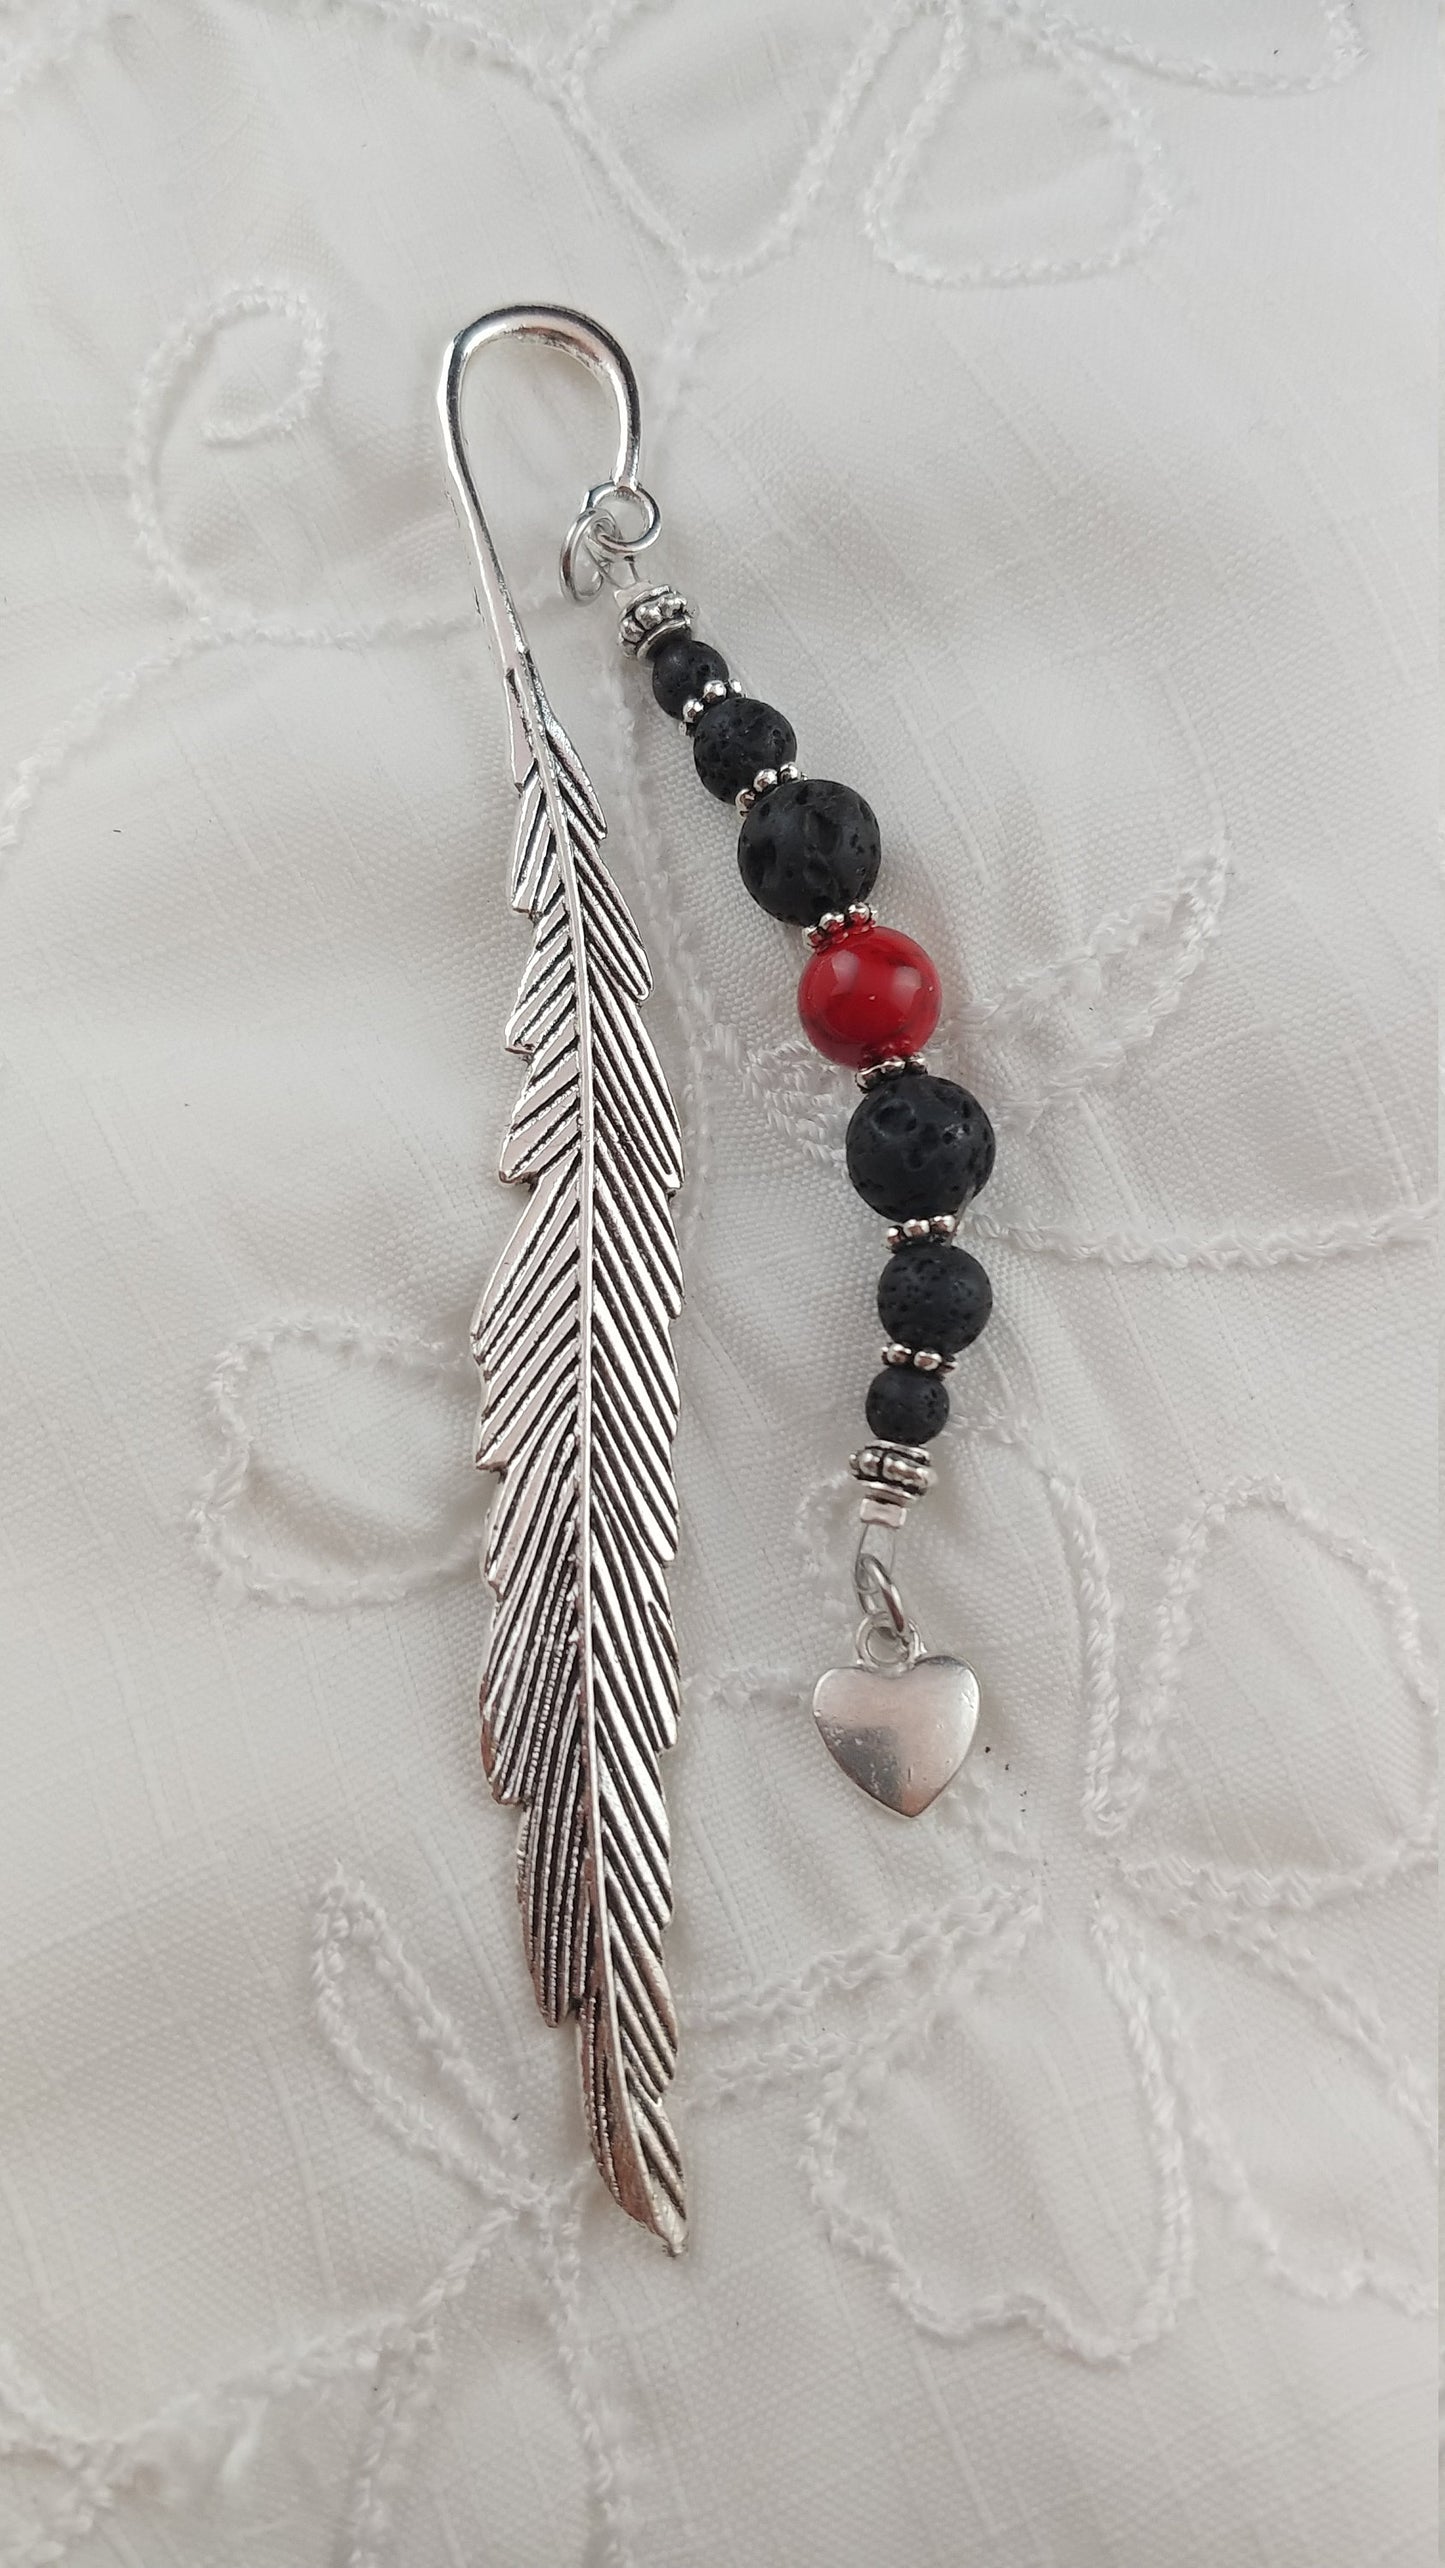 Lava Bookmark with lava rock beads and a red tourquise bead and with a heart charm